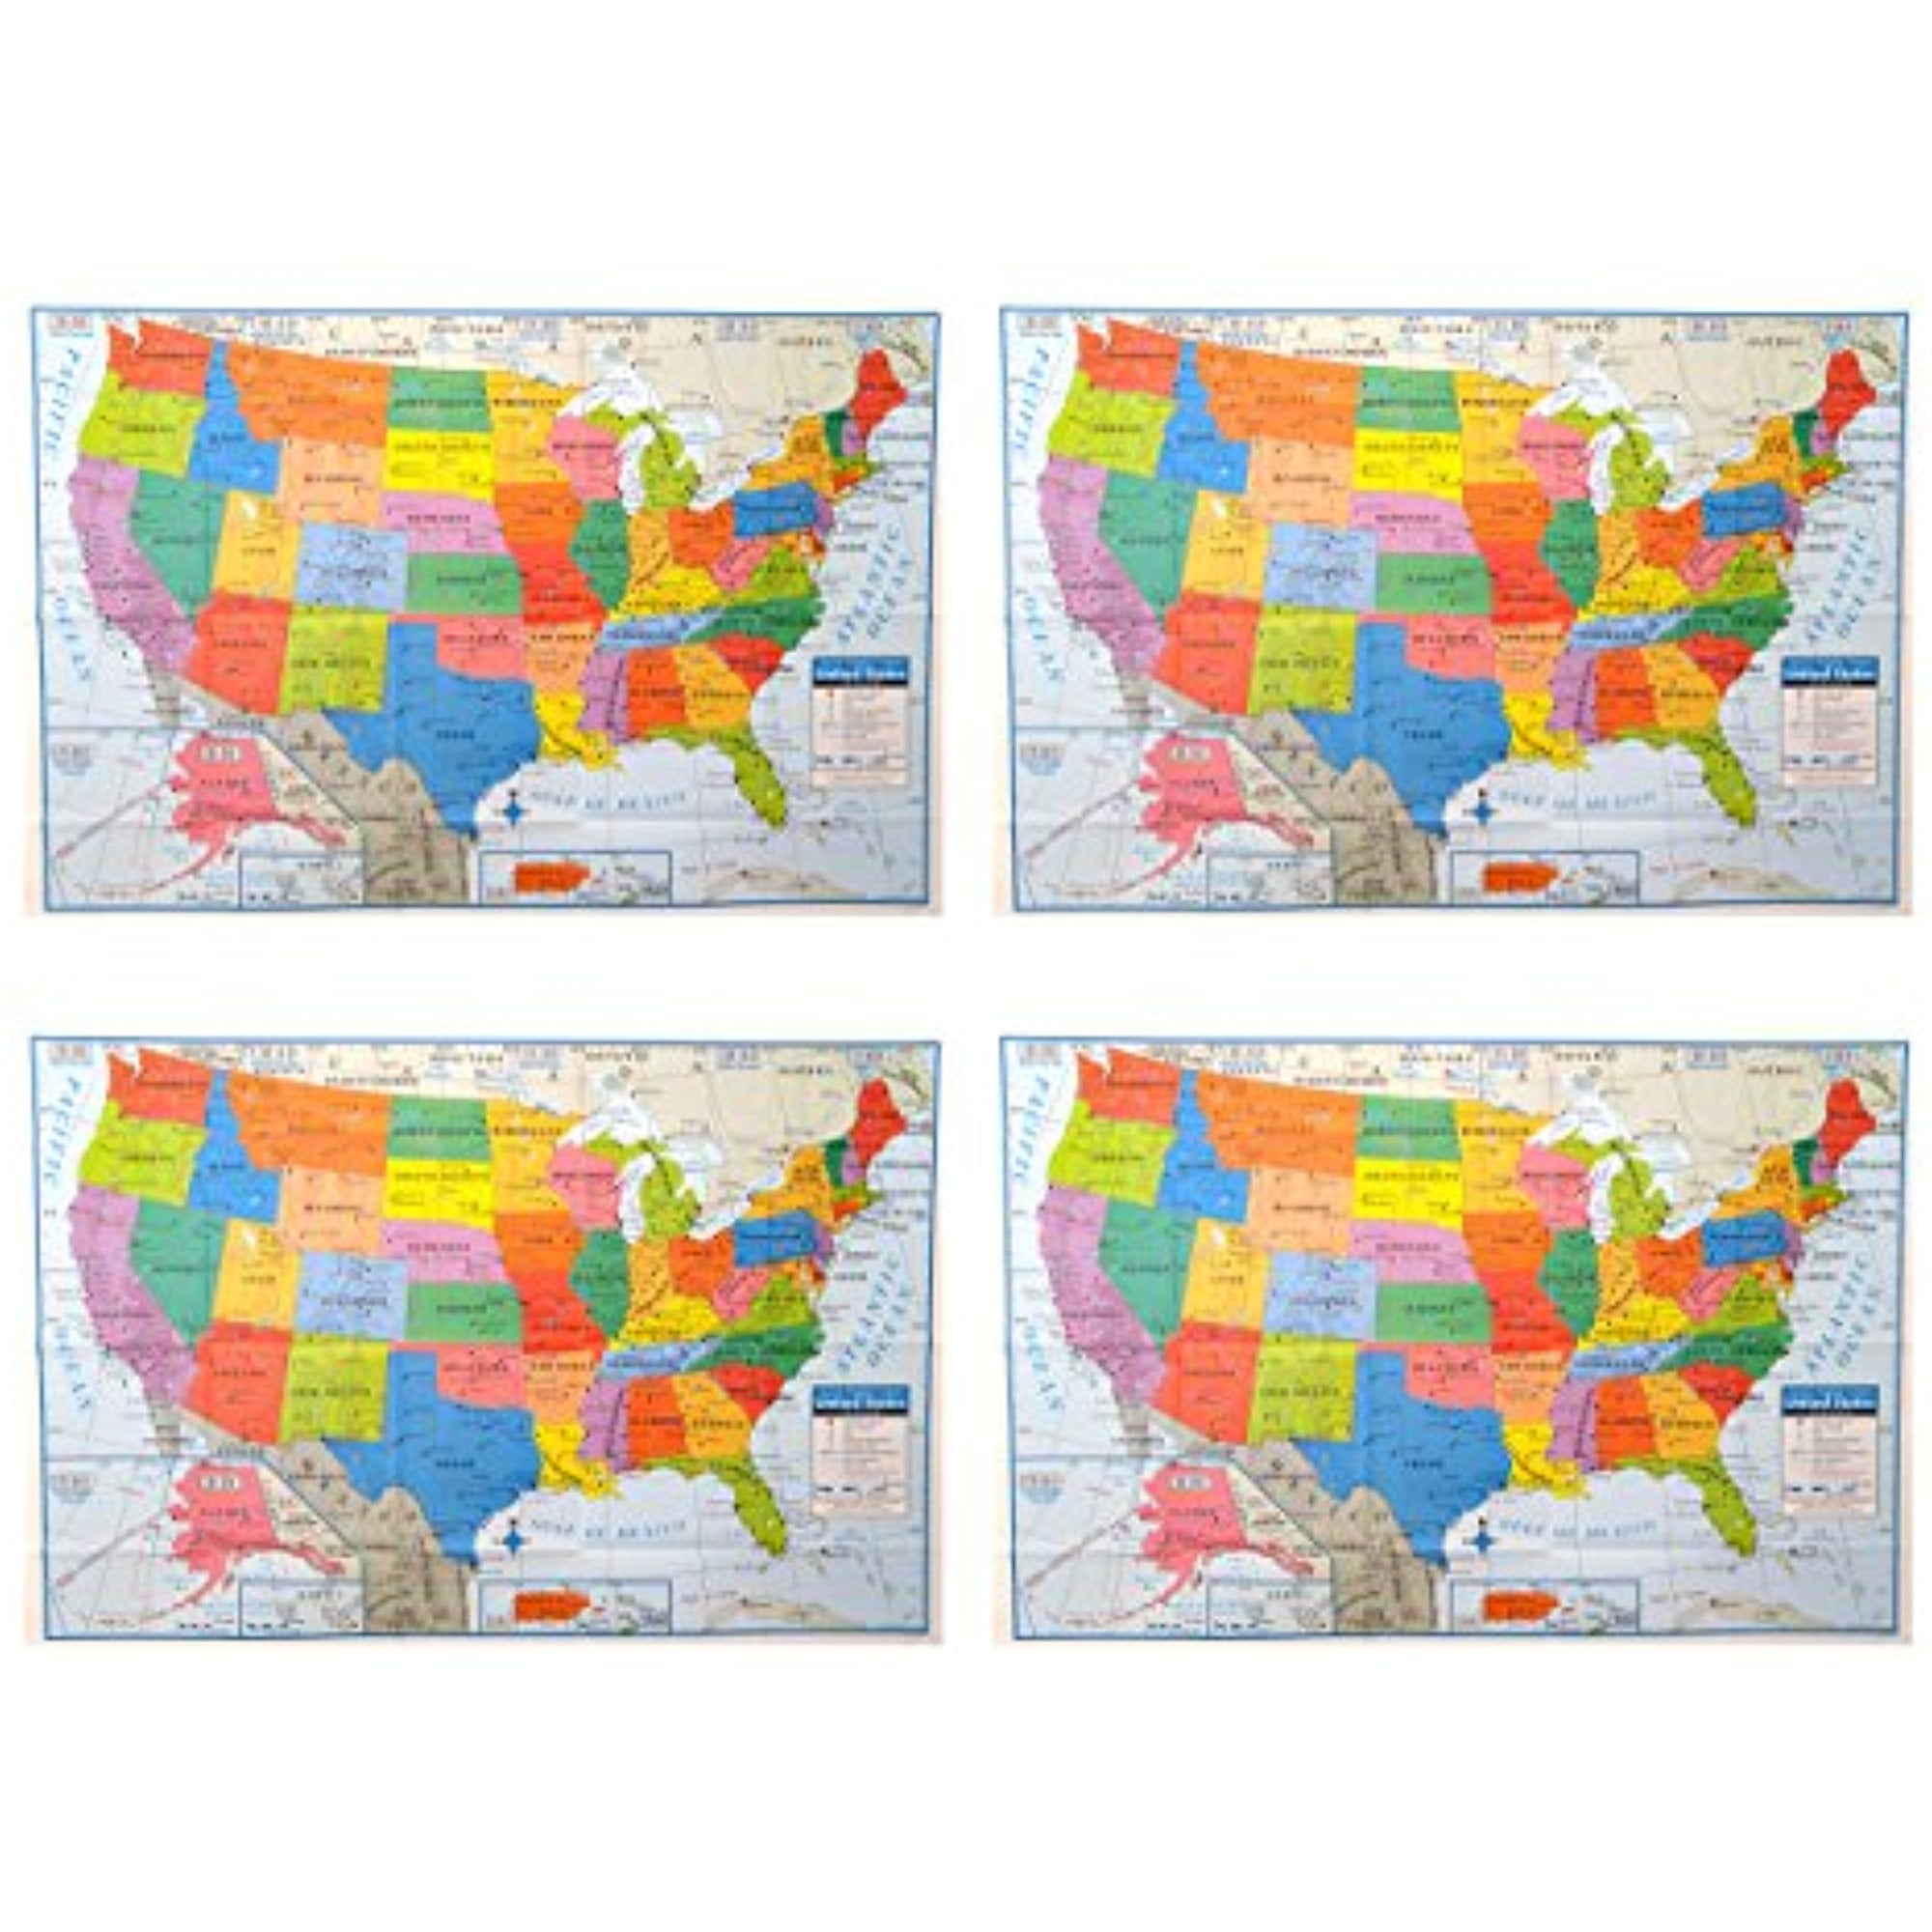 Pack of 2 Superior Mapping Company United States Poster Size Wall Map 40 x 28 with Cities 2 Maps 